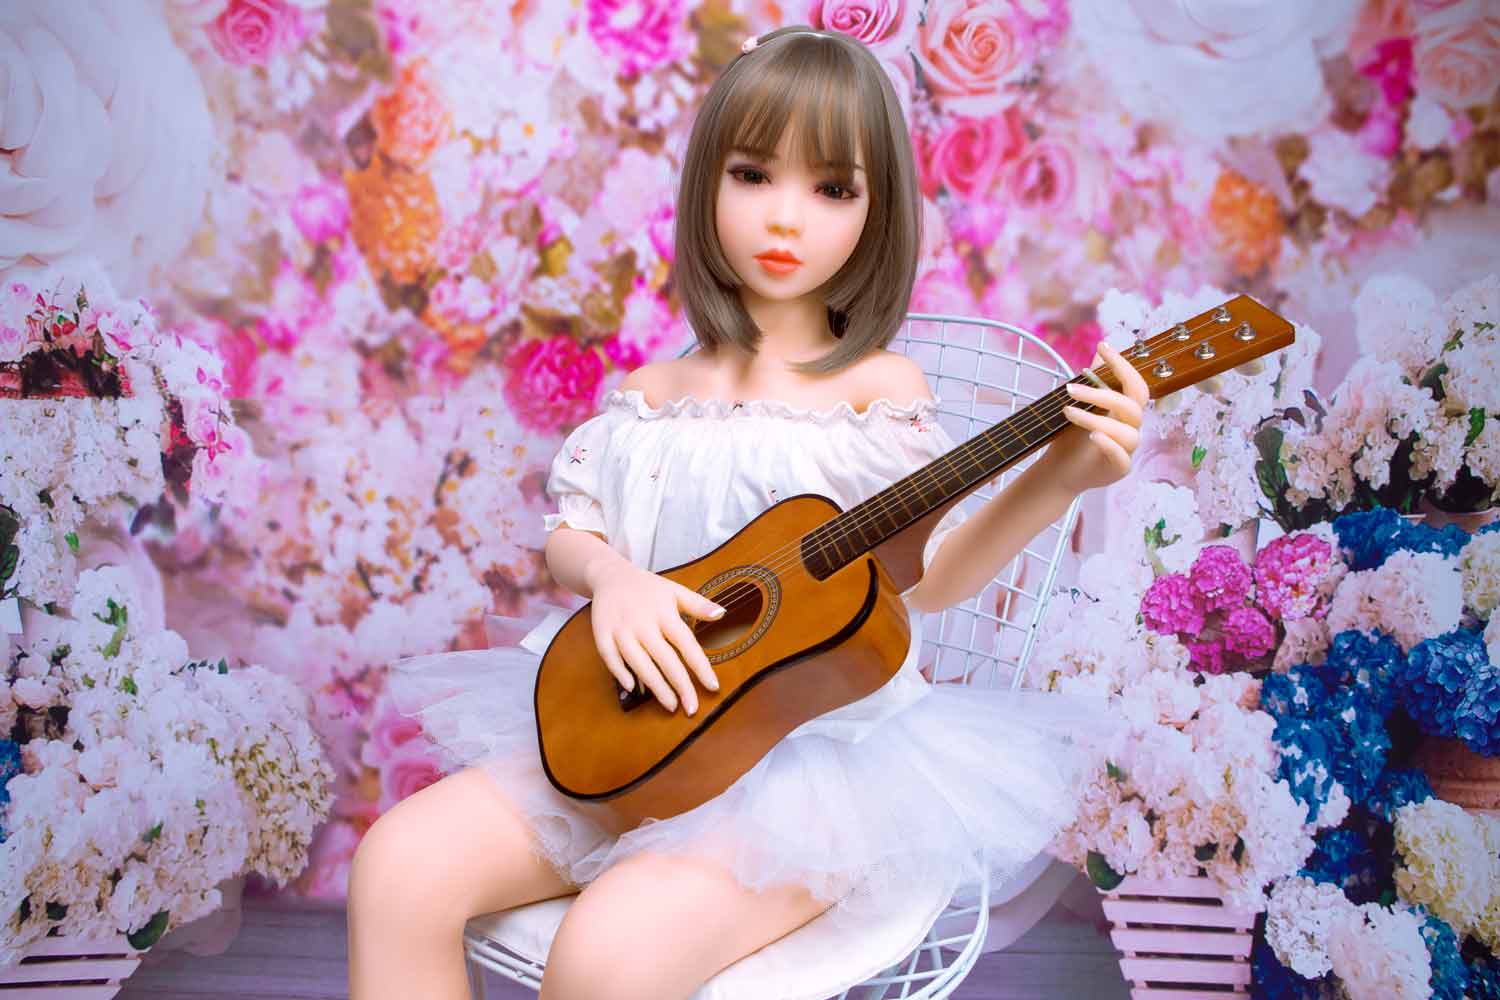 Mini sex doll playing the guitar